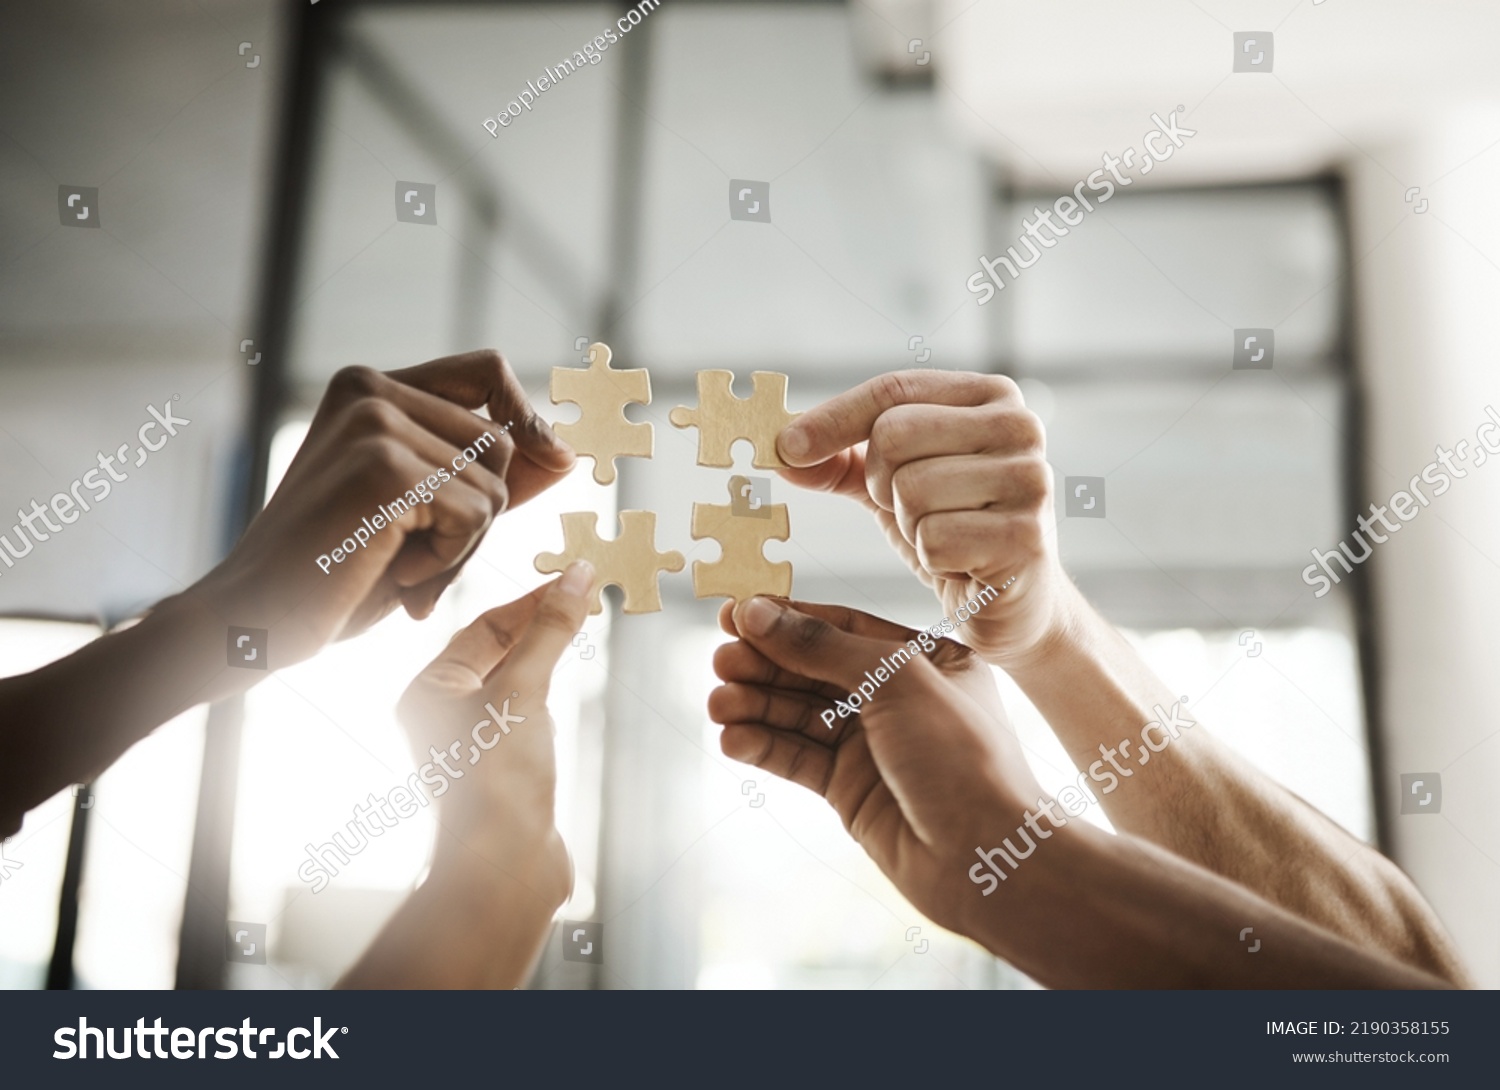 Business people hands with puzzle showing solution, problem solving and teamwork. Smart group or team activity completing, finishing a task project or assignment in difficult challenging work crisis #2190358155